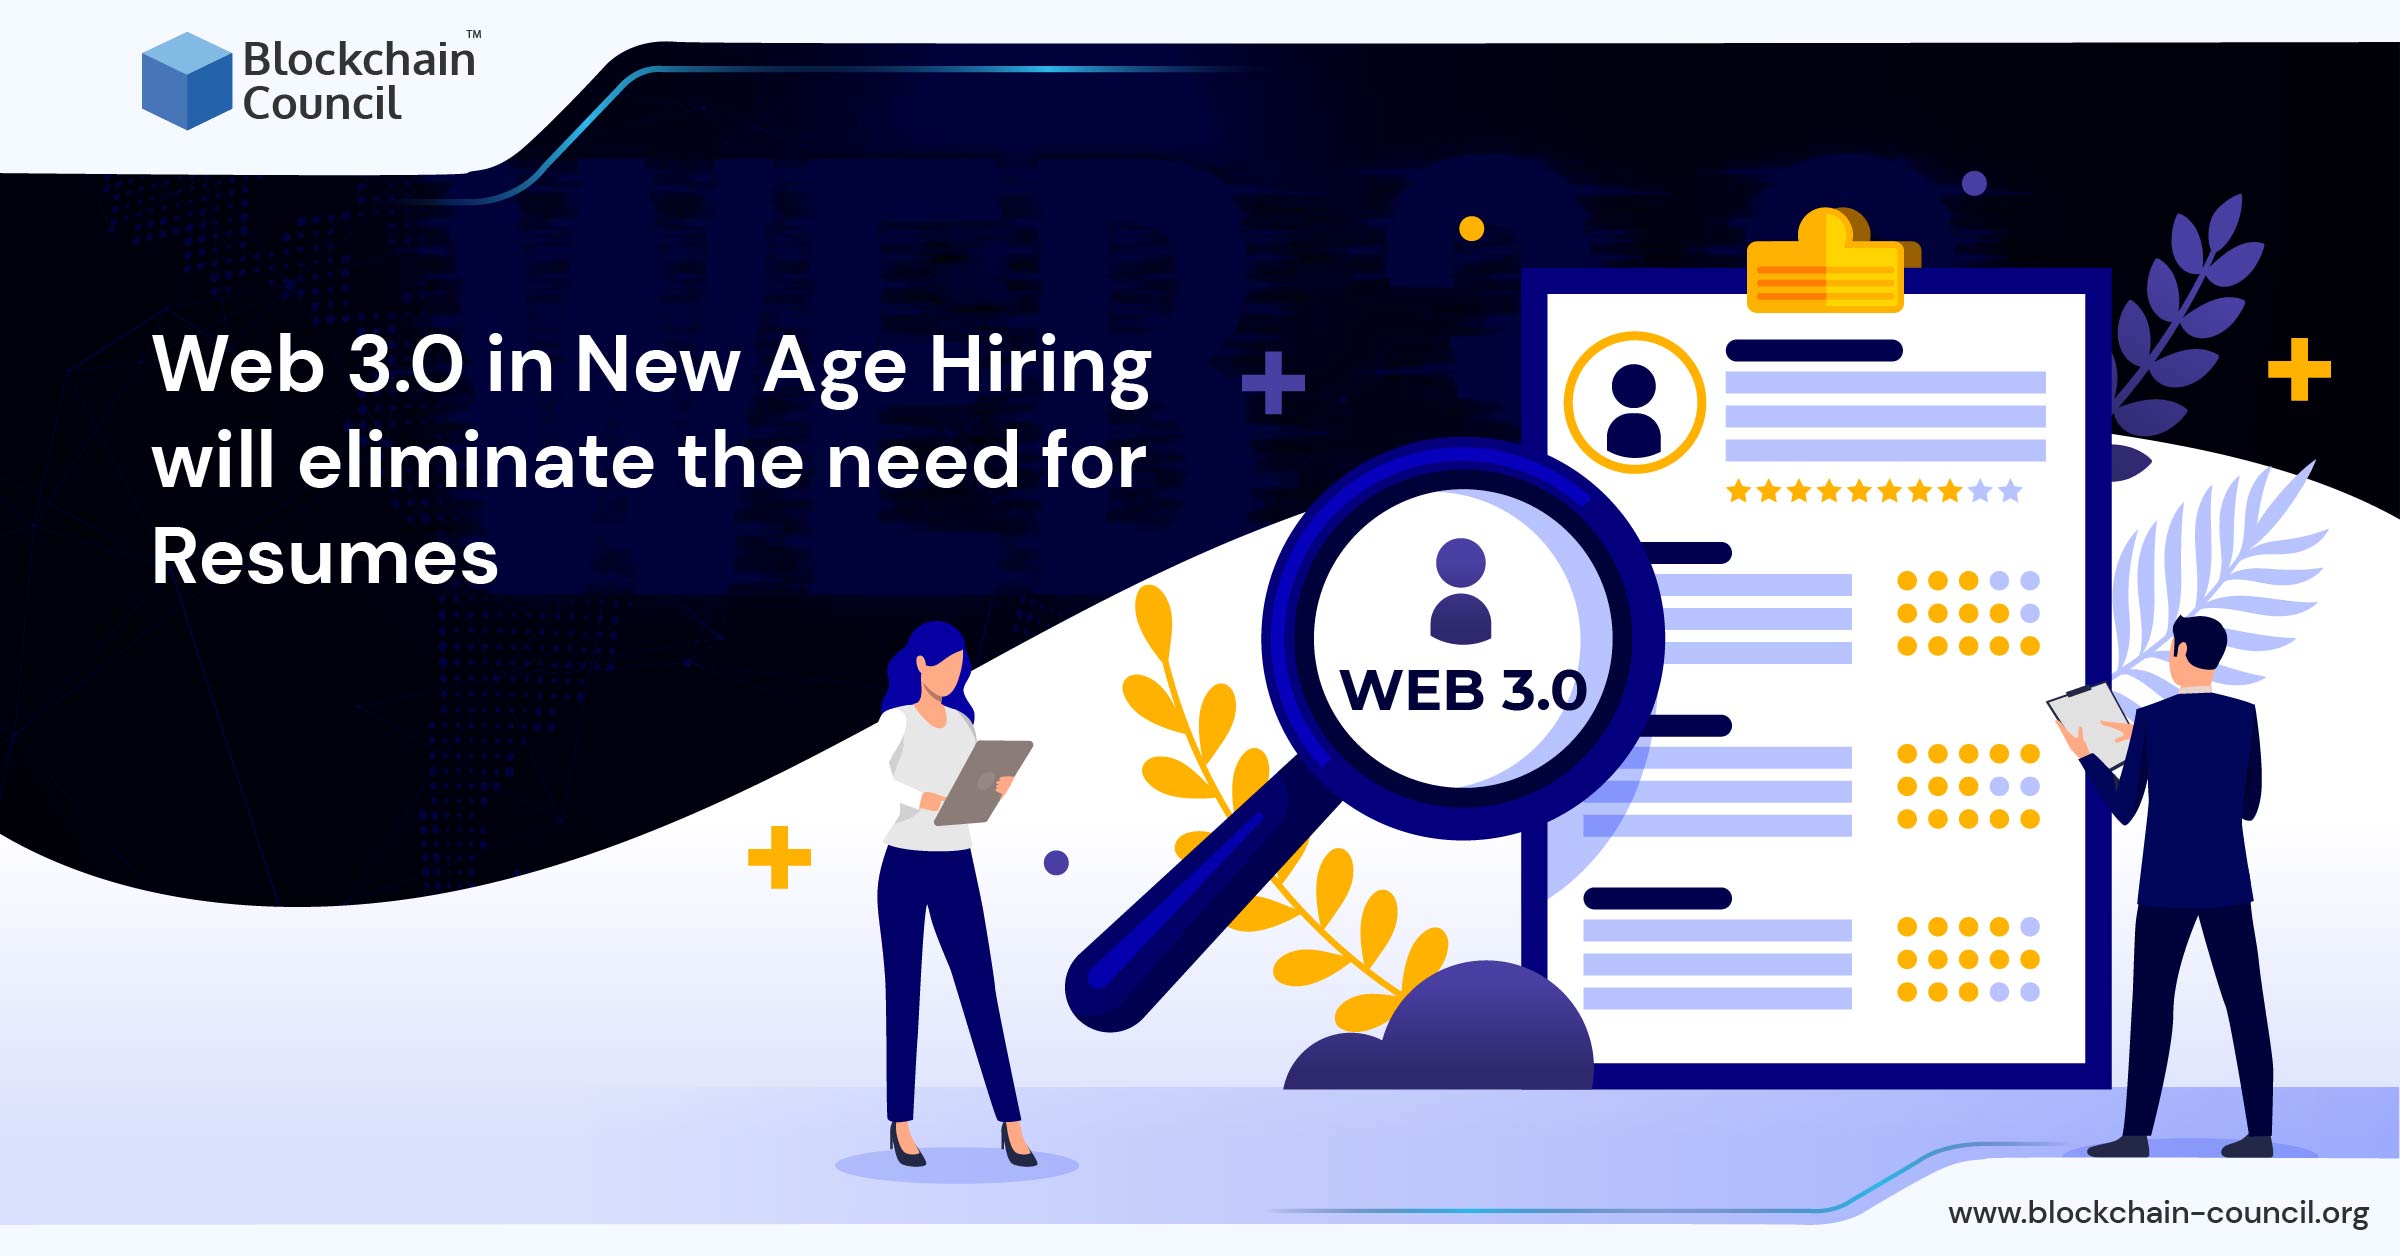 Web 3.0 in New Age Hiring will Eliminate the Need for Resumes